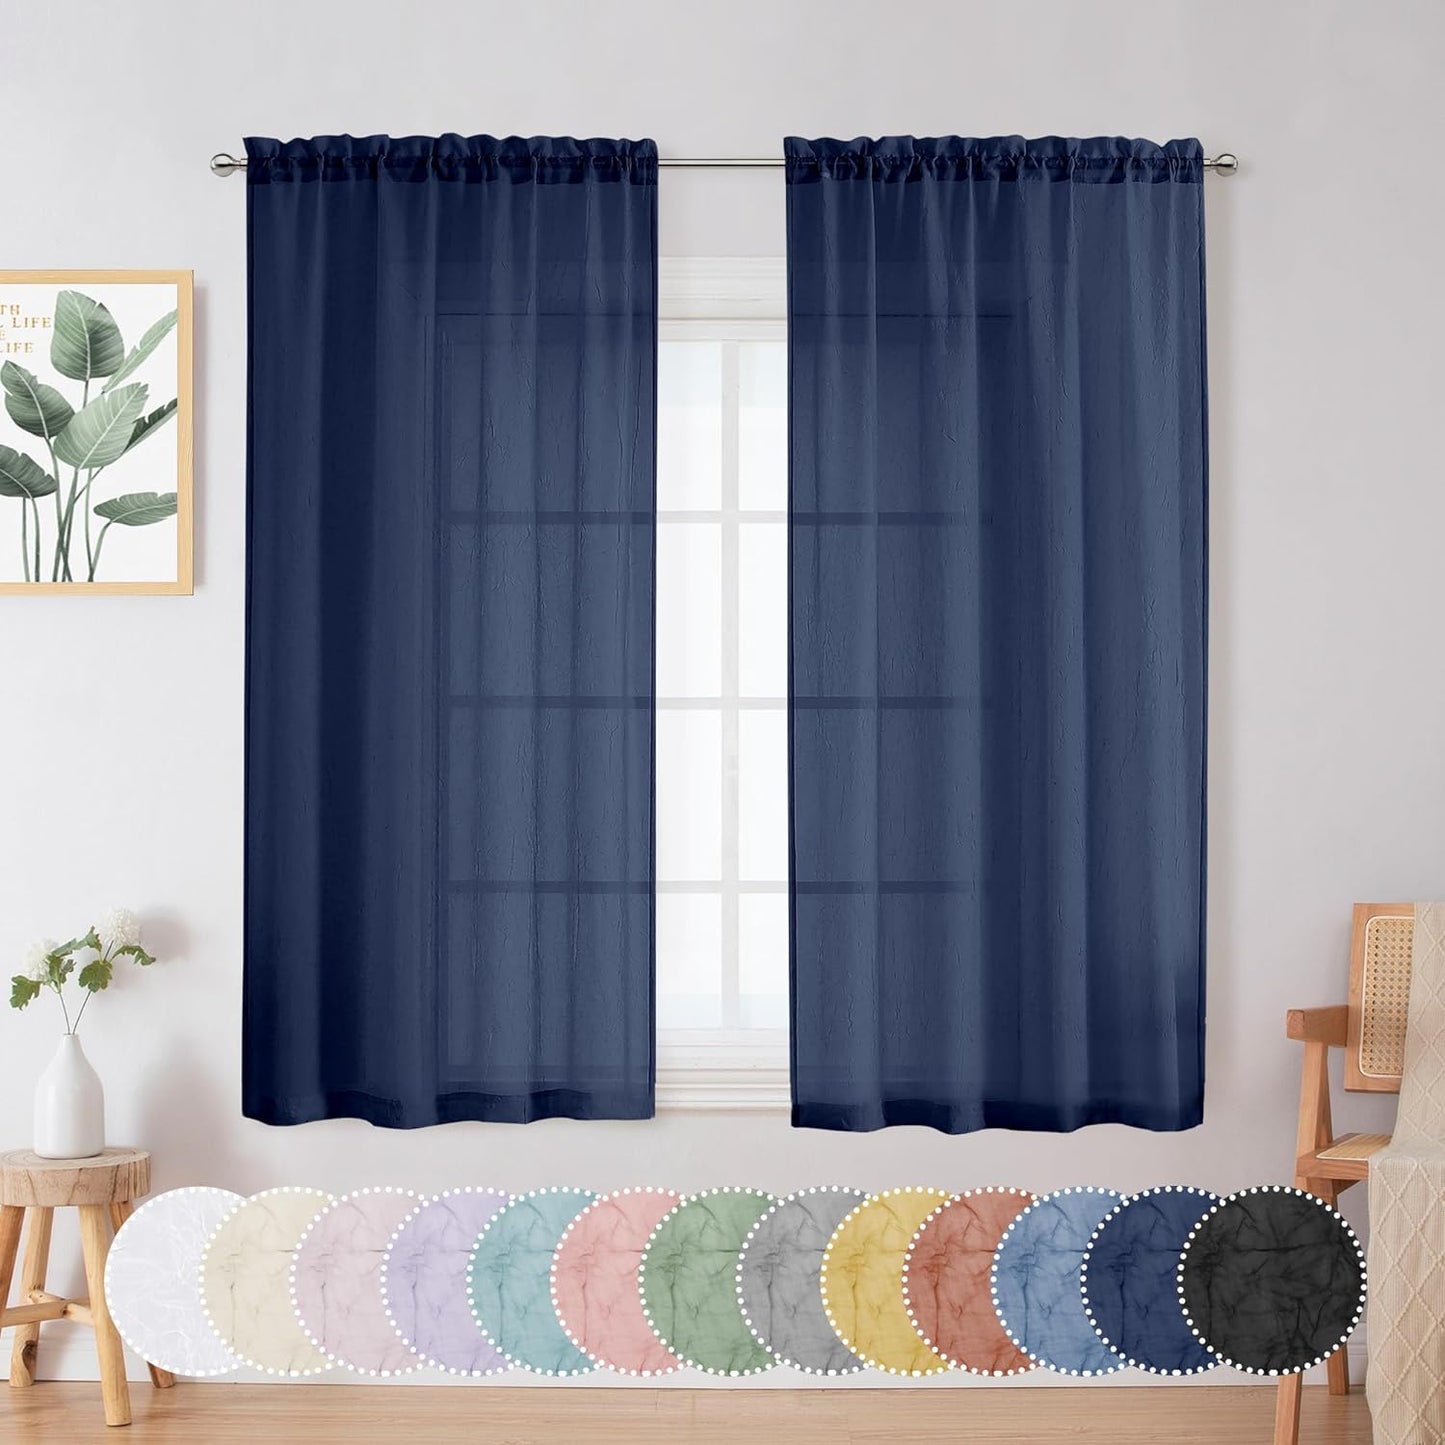 Chyhomenyc Crushed White Sheer Valances for Window 14 Inch Length 2 PCS, Crinkle Voile Short Kitchen Curtains with Dual Rod Pockets，Gauzy Bedroom Curtain Valance，Each 42Wx14L Inches  Chyhomenyc Navy Blue 28 W X 54 L 